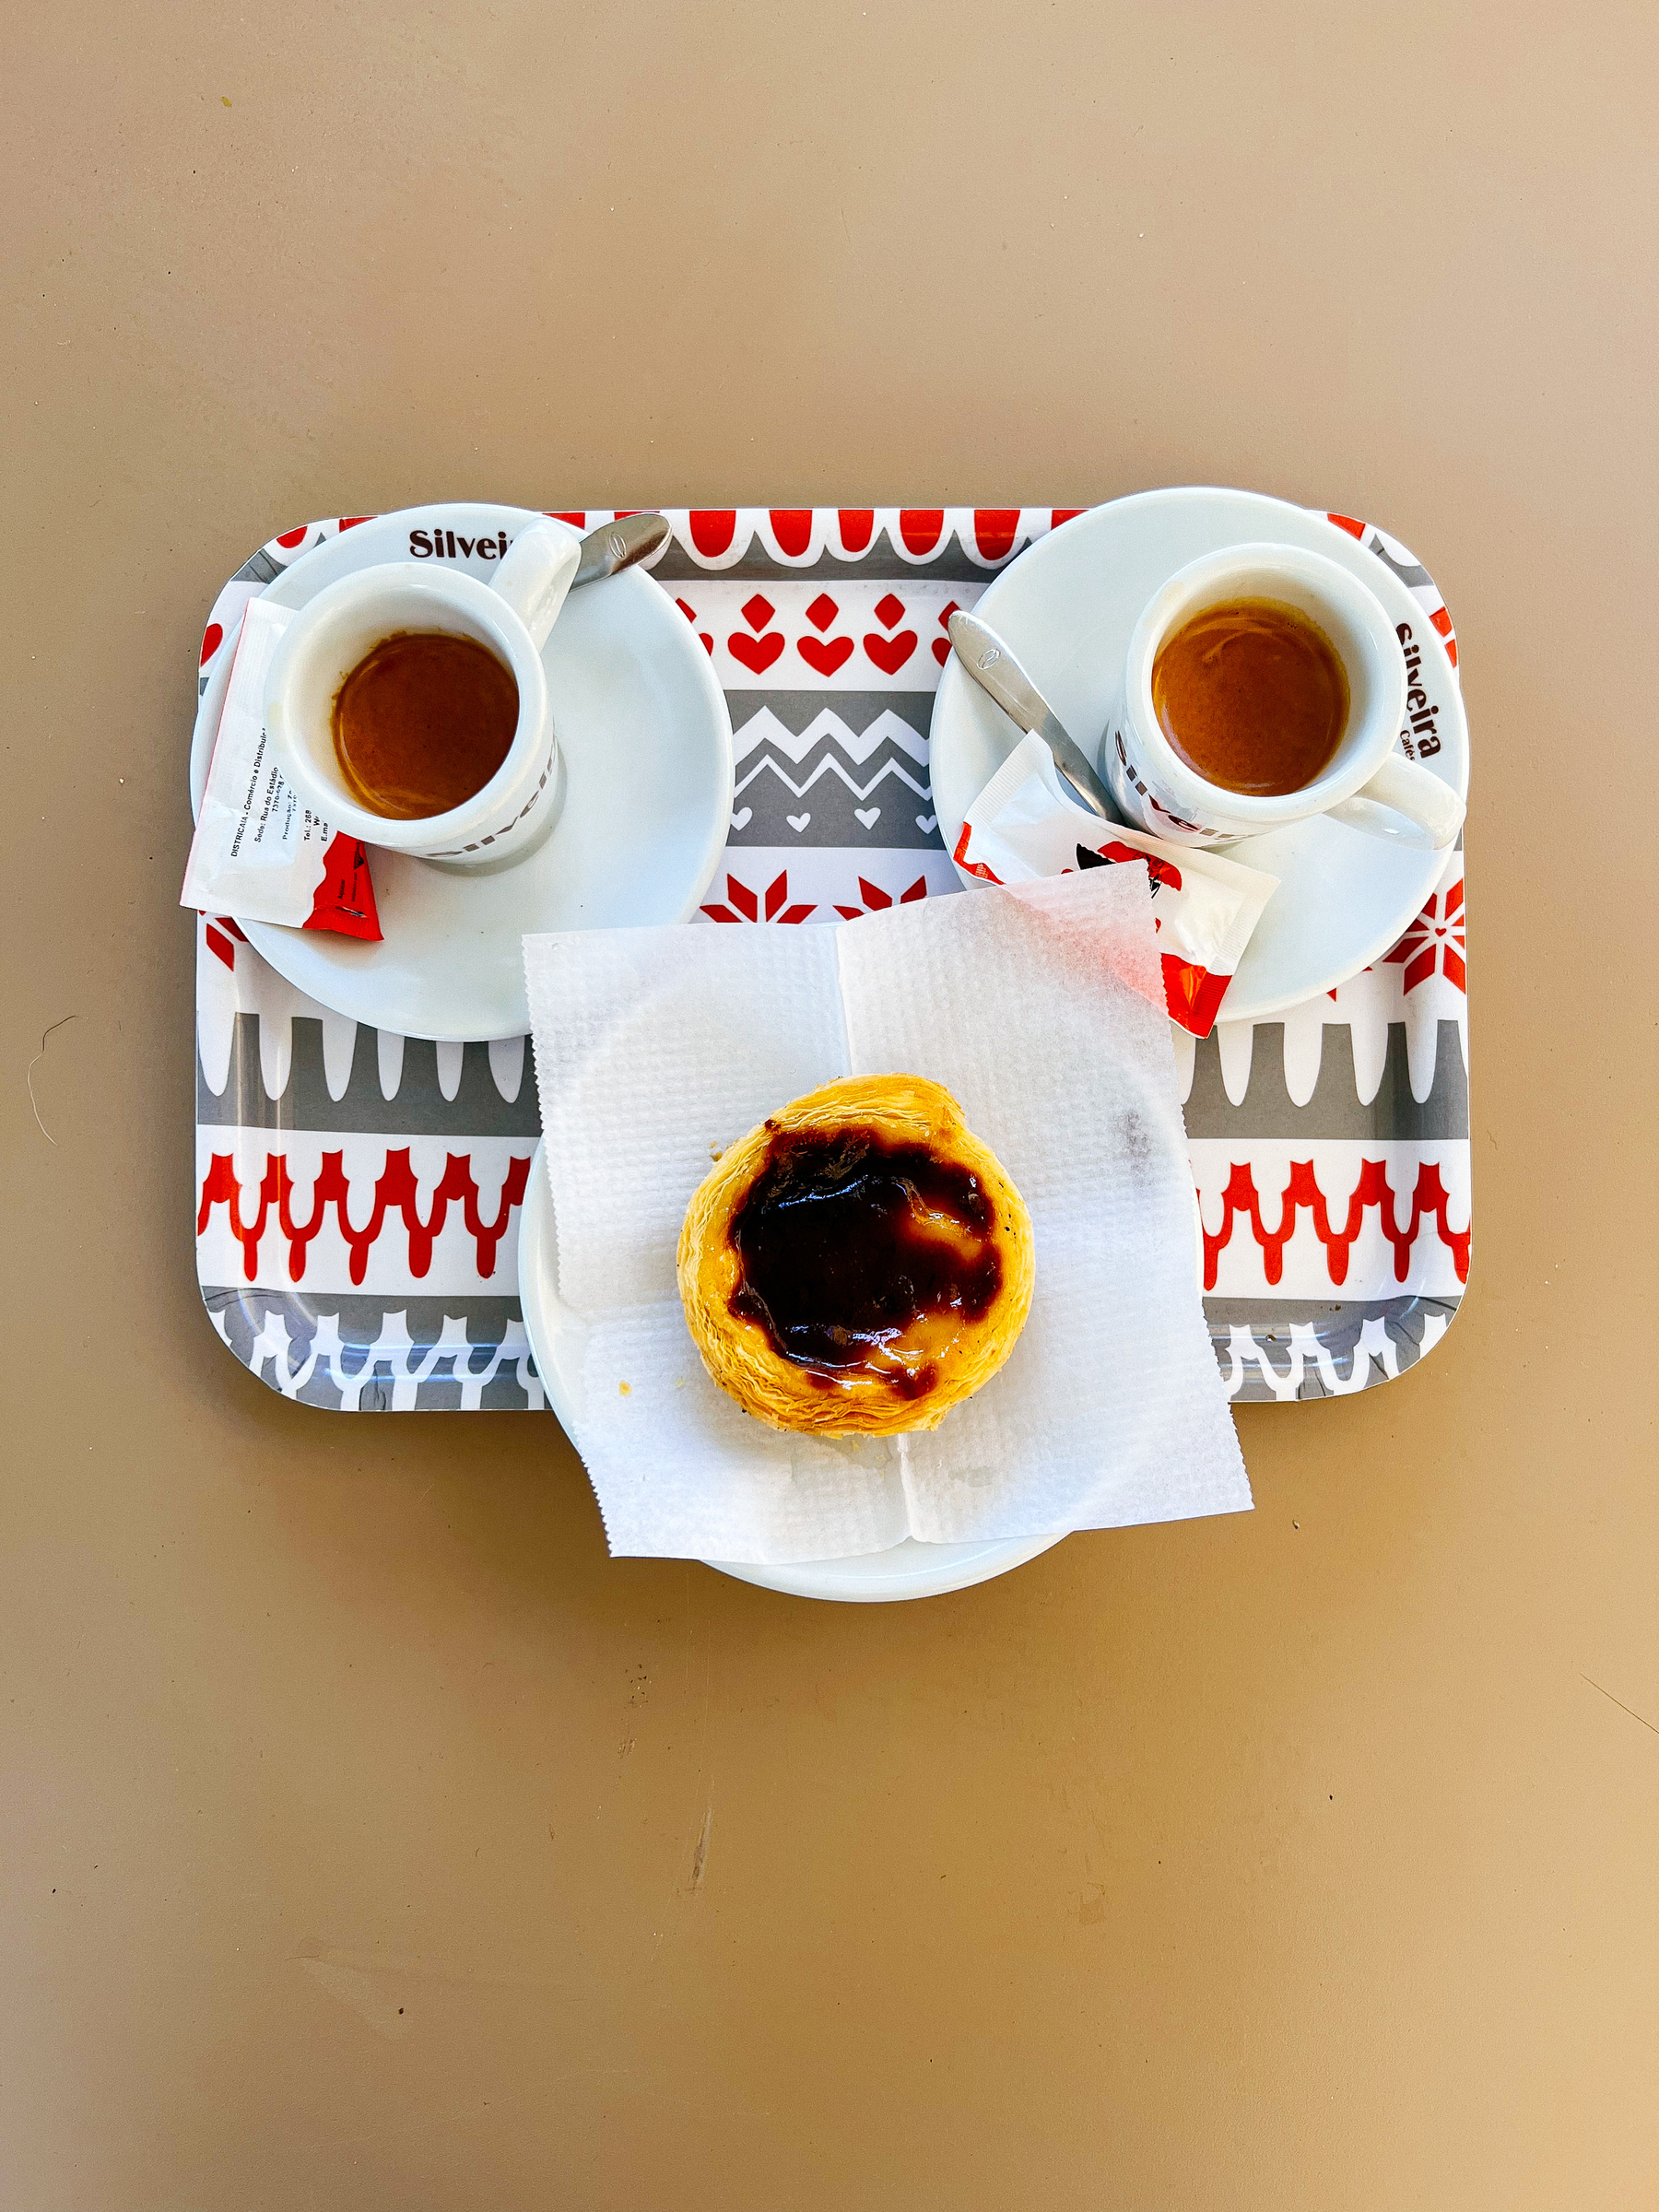 Looking down on a tray, two espressos and a pastel de nata look like a face. 